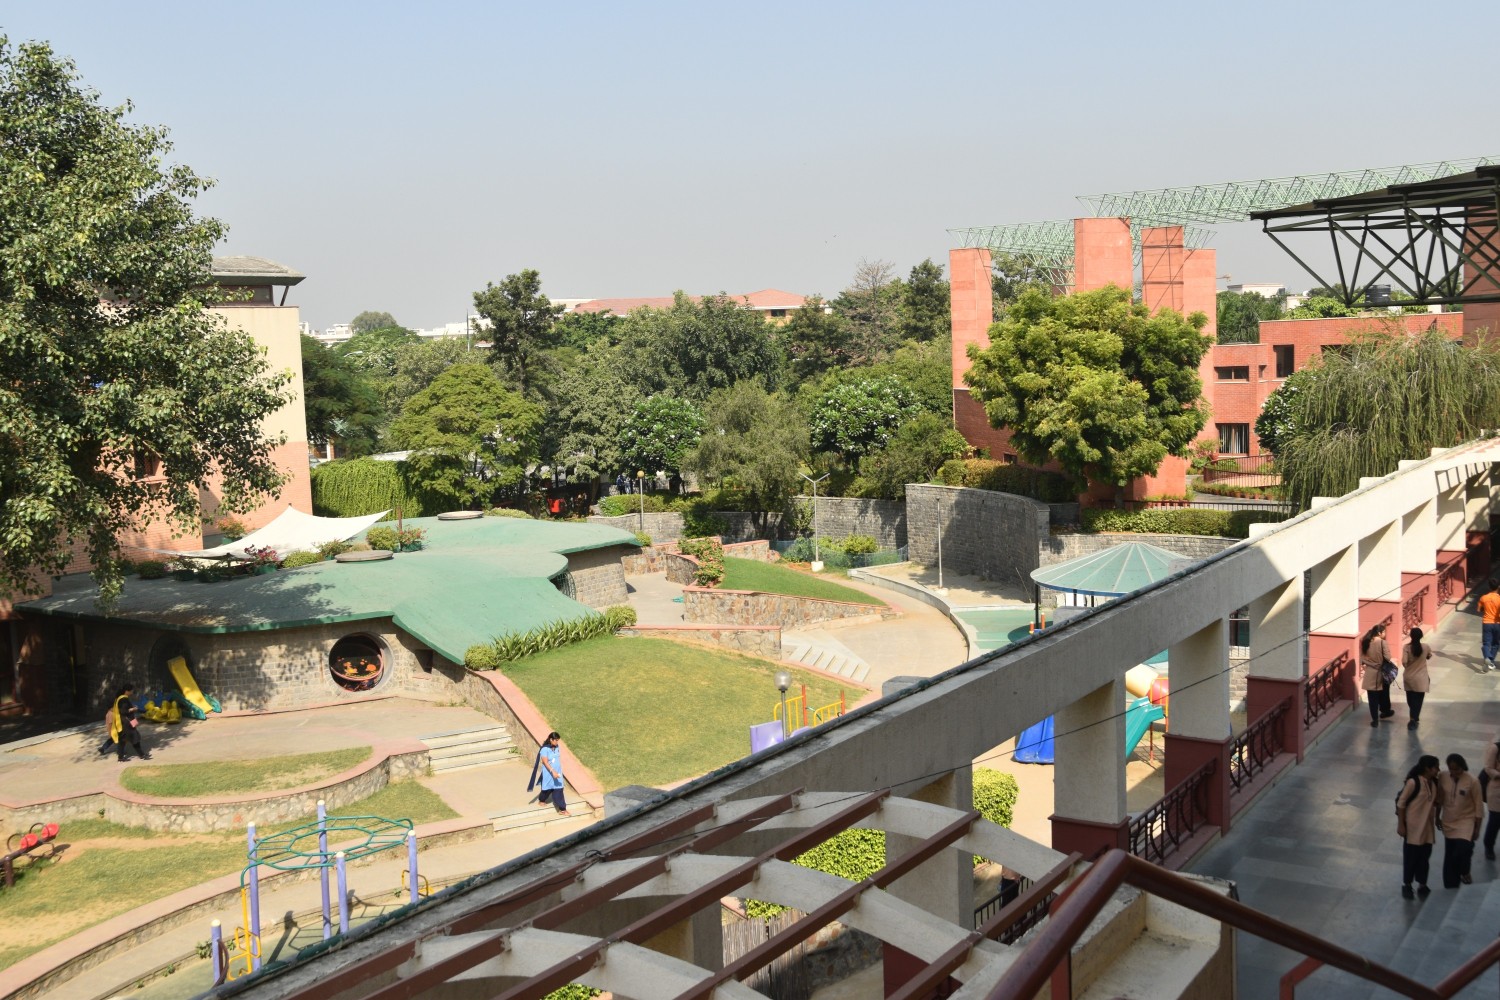 View of the school from top of the auditorium